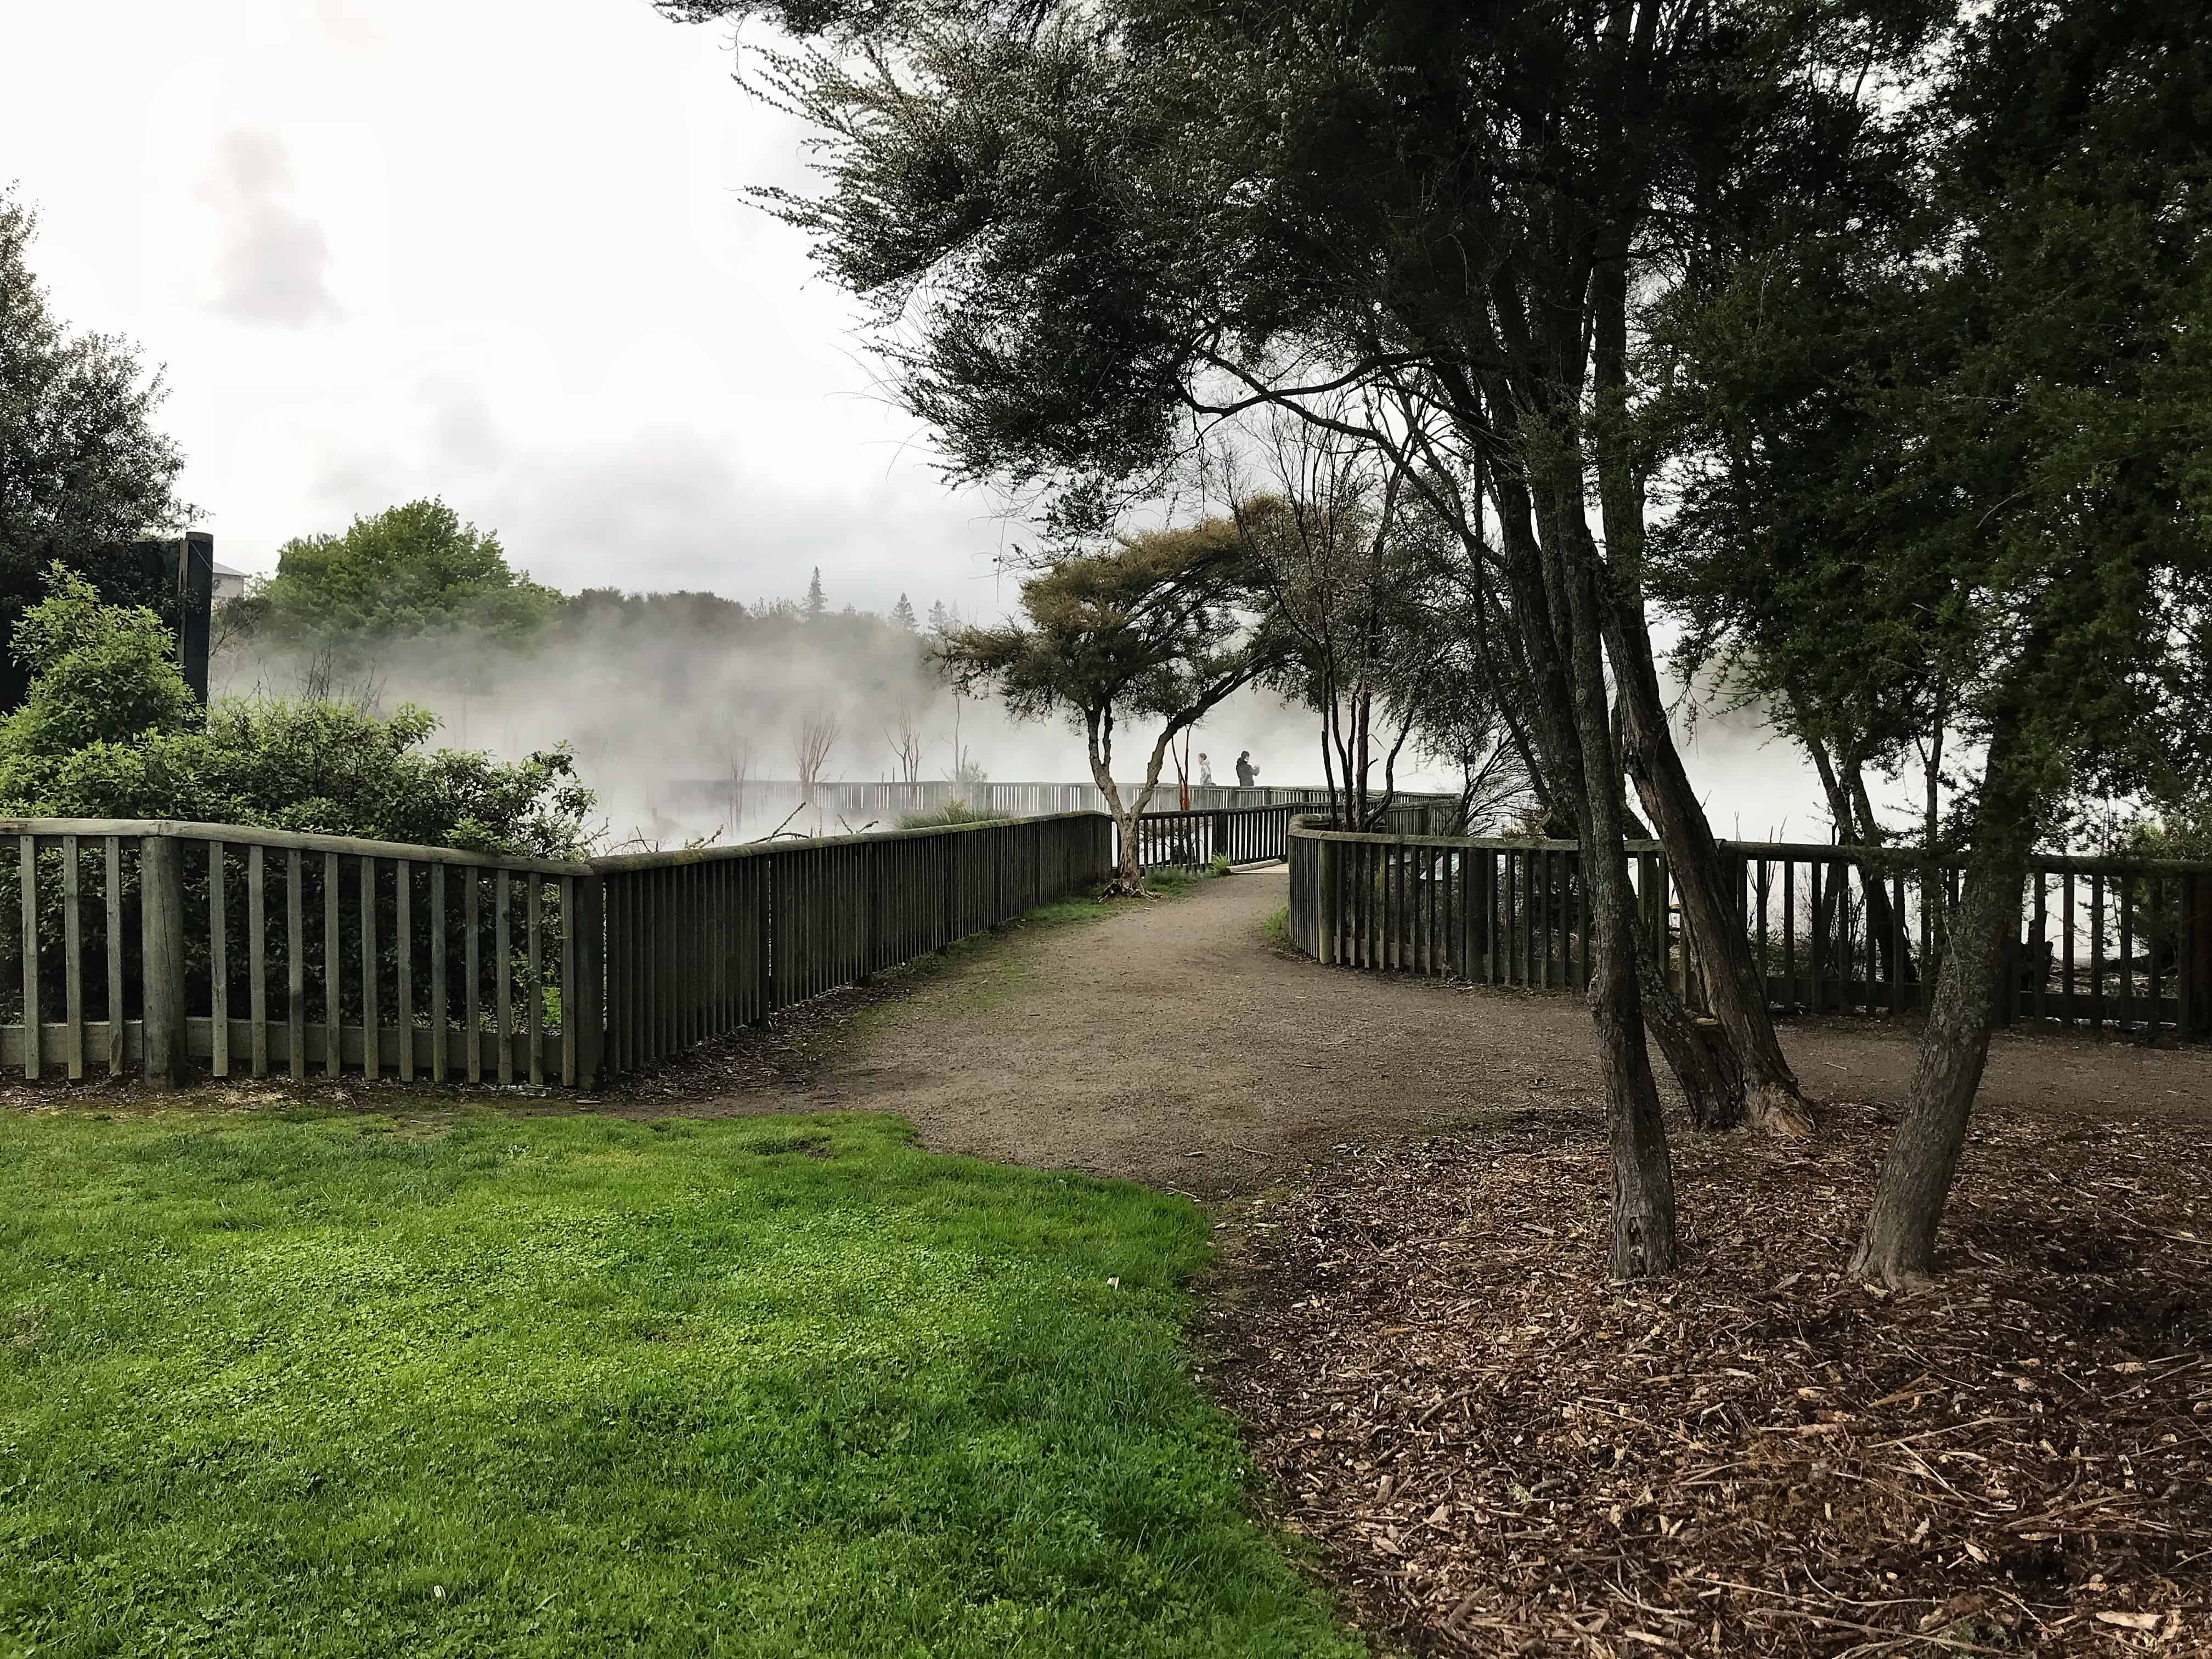 steam coming from the water in Rotorua, New Zealand's Kuirau Park